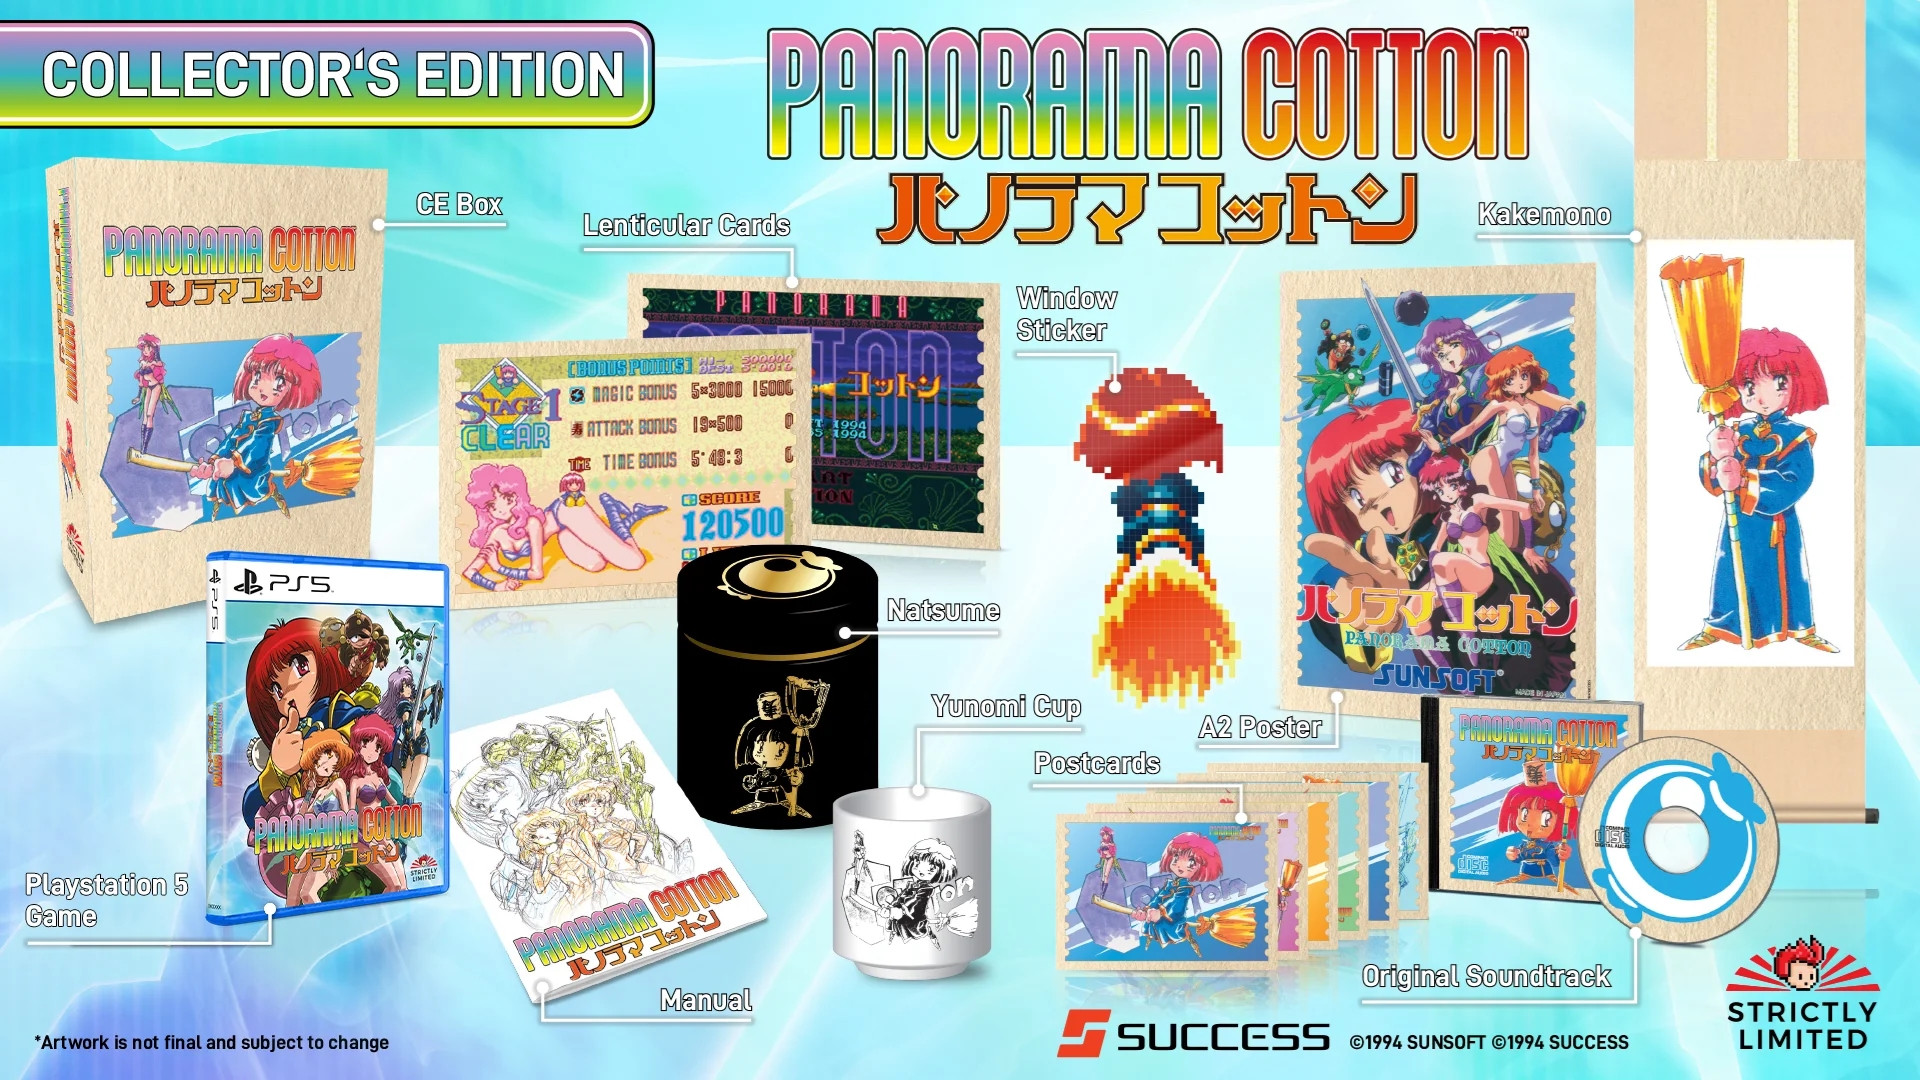 Panorama Cotton - Collector's Edition (Strictly Limited) (PS5), ININ Games, Strictly Limited Games